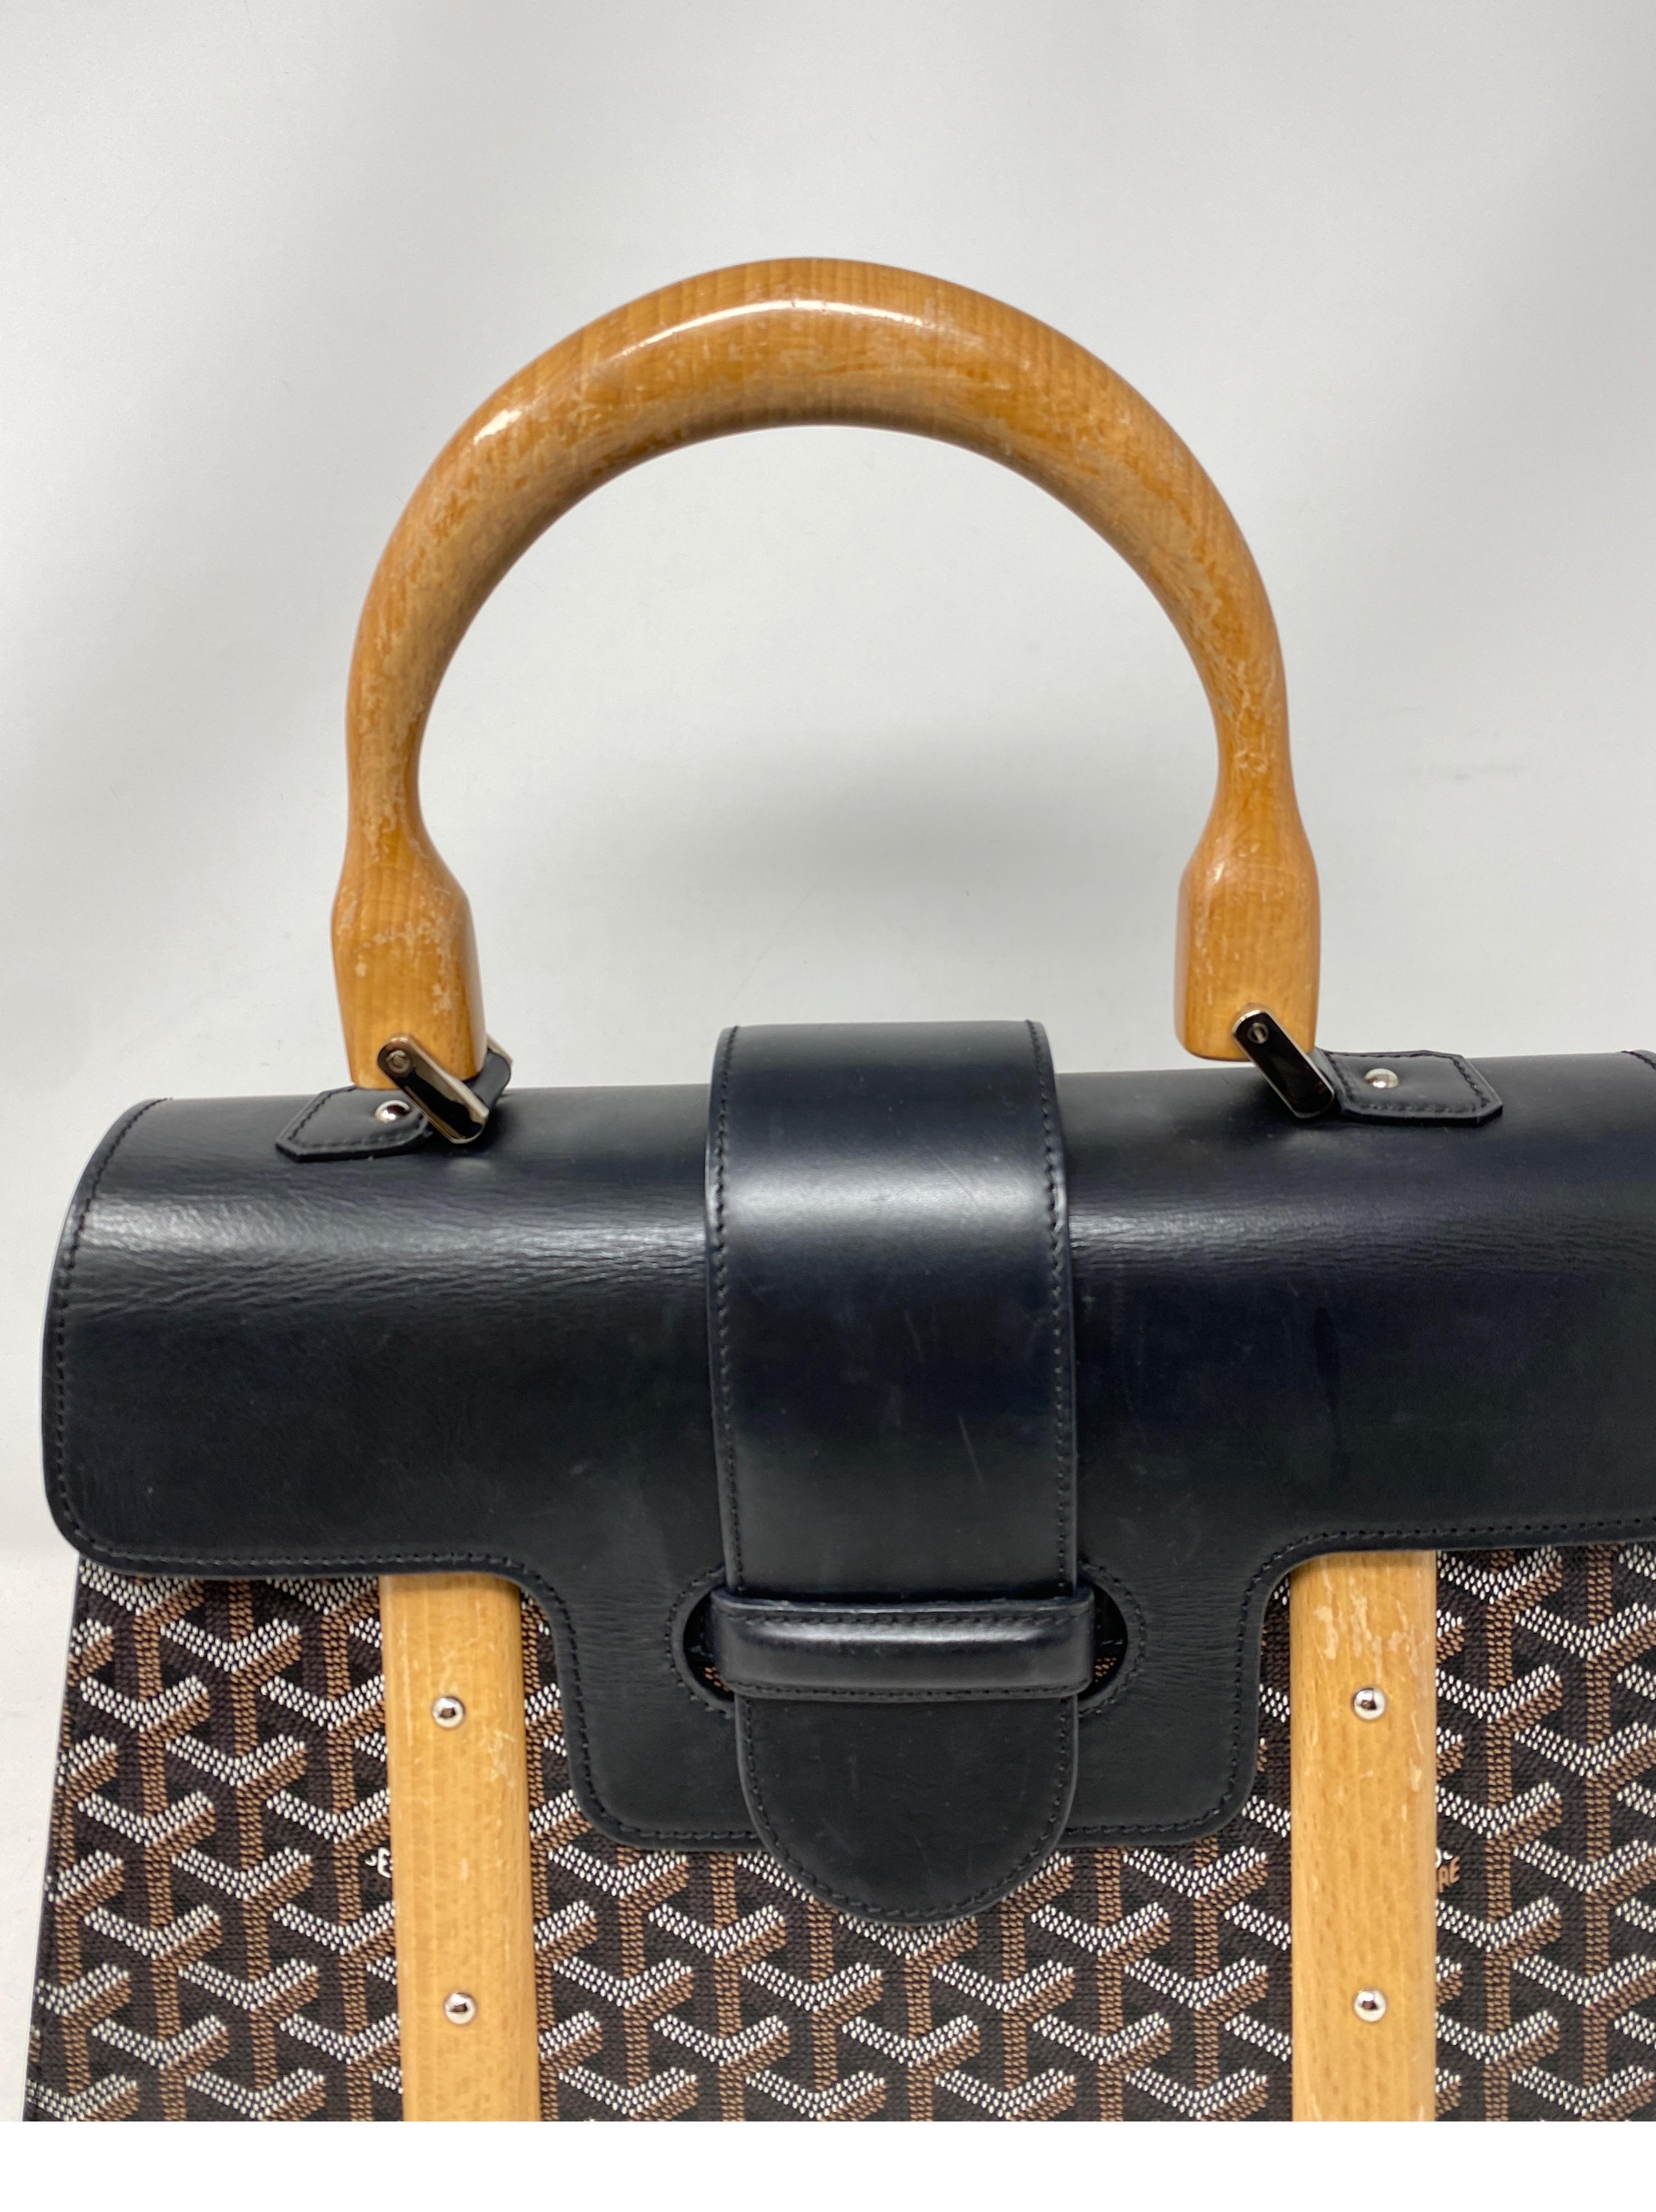 Goyard Black Saigon MM Bag. Wood and black leather large handbag. Stunning bag with beautiful details. Has some wear on the inside. Light stains. Overall good condition. Don't miss out. Guaranteed authentic. 